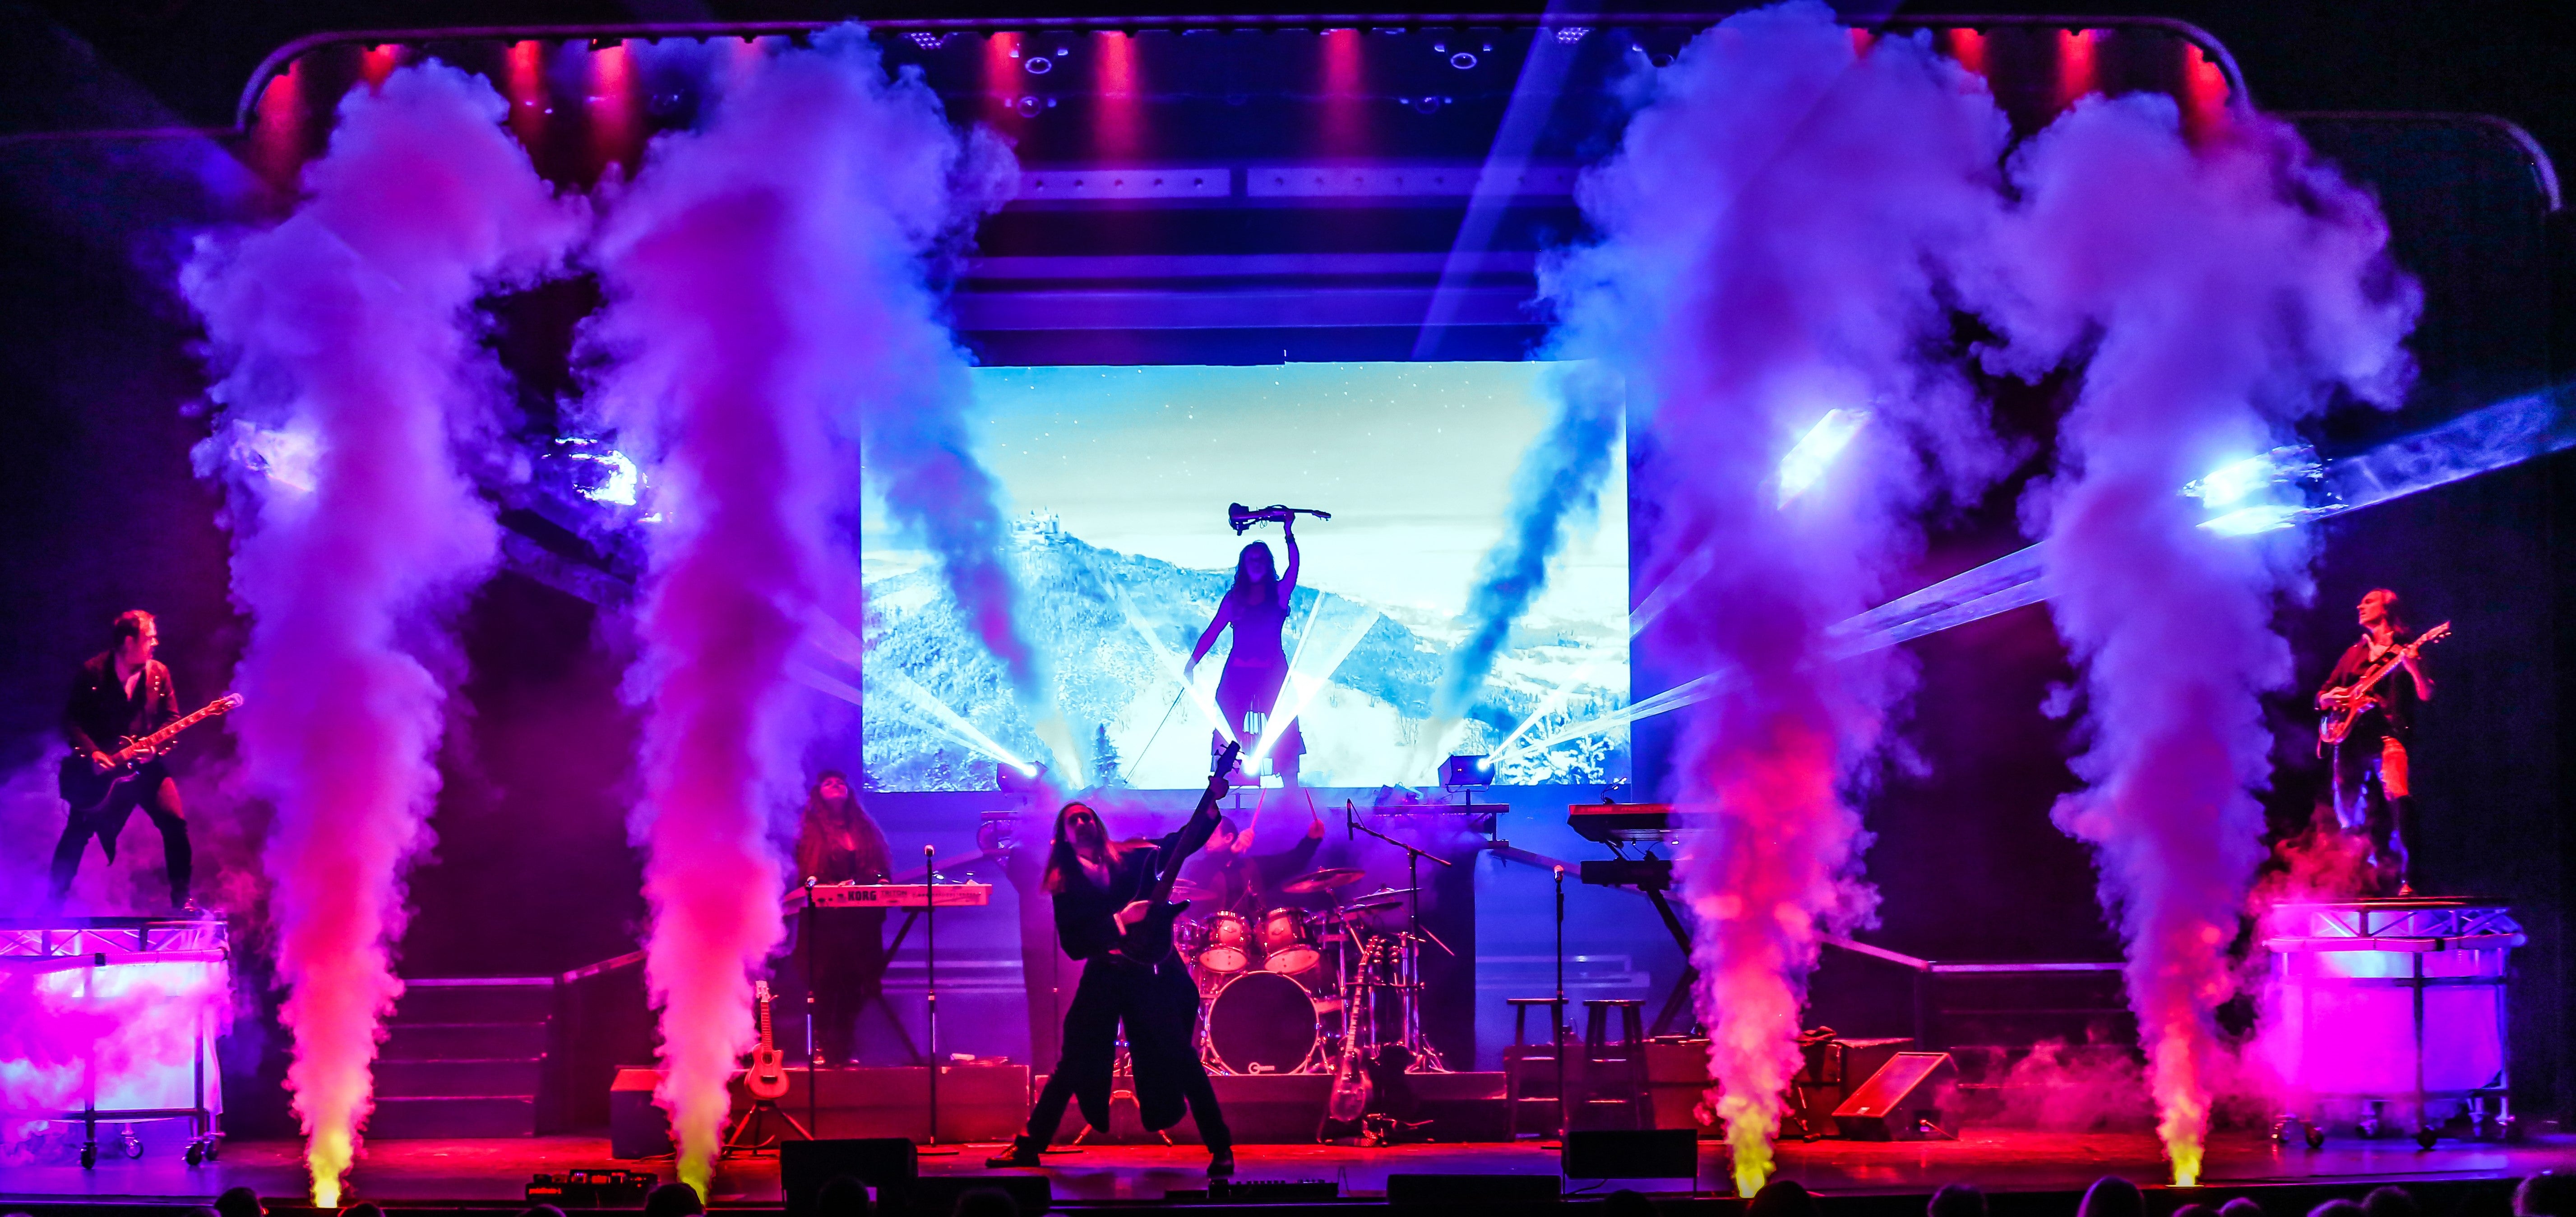 The Prophecy Show - The music of Trans Siberian Orchestra in Daytona Beach promo photo for Exclusive presale offer code